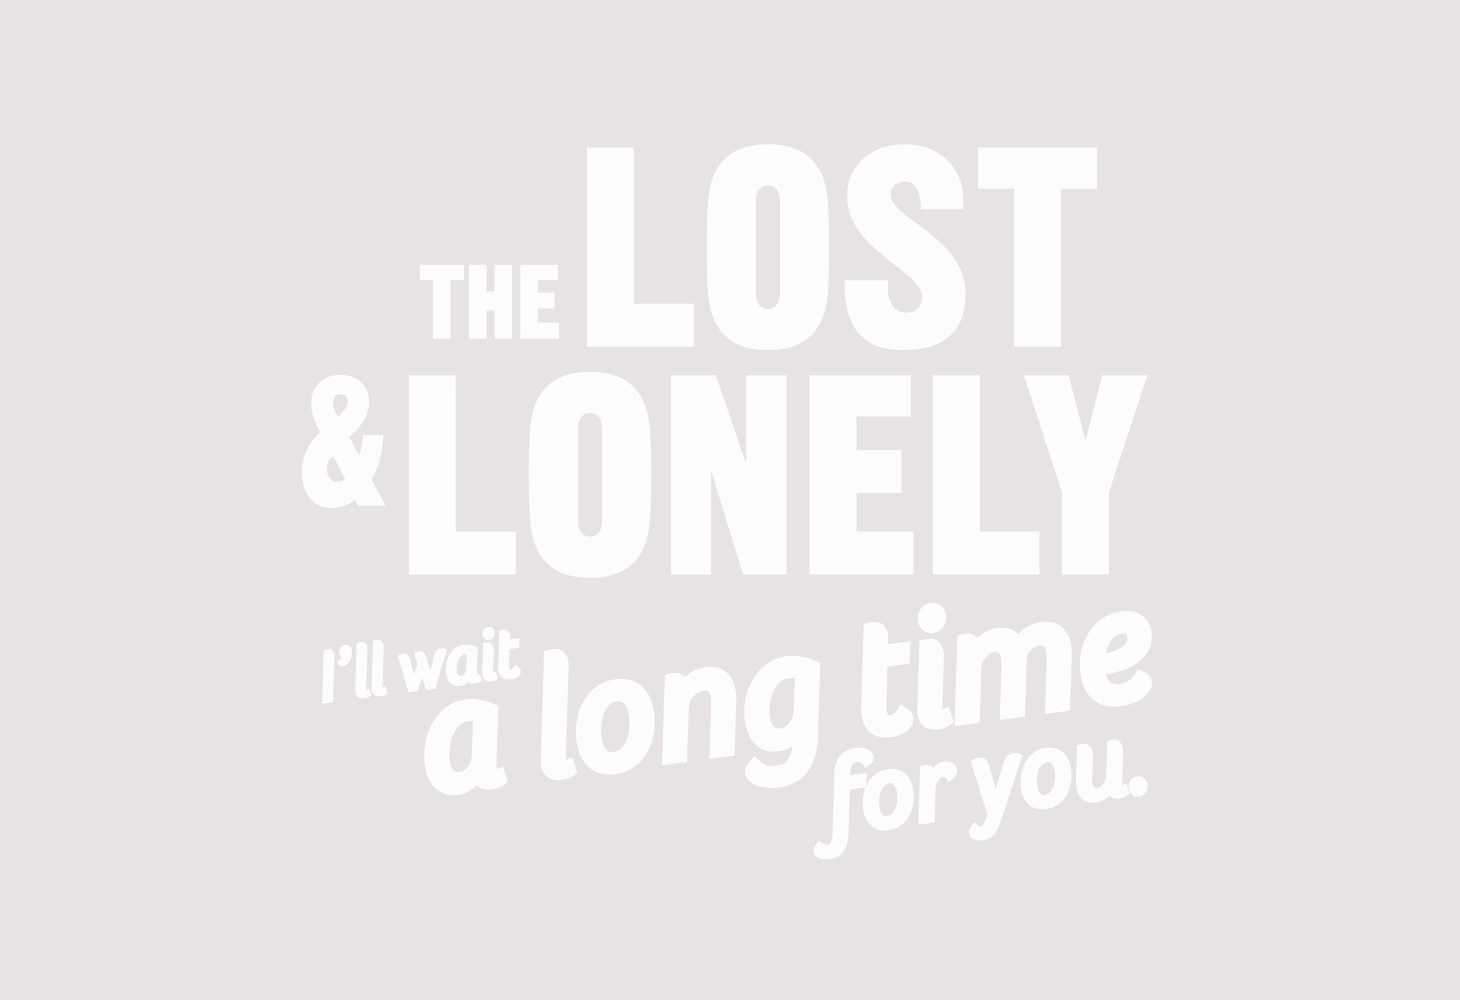 The Lost & Lonely, I'll wait a long time for you.